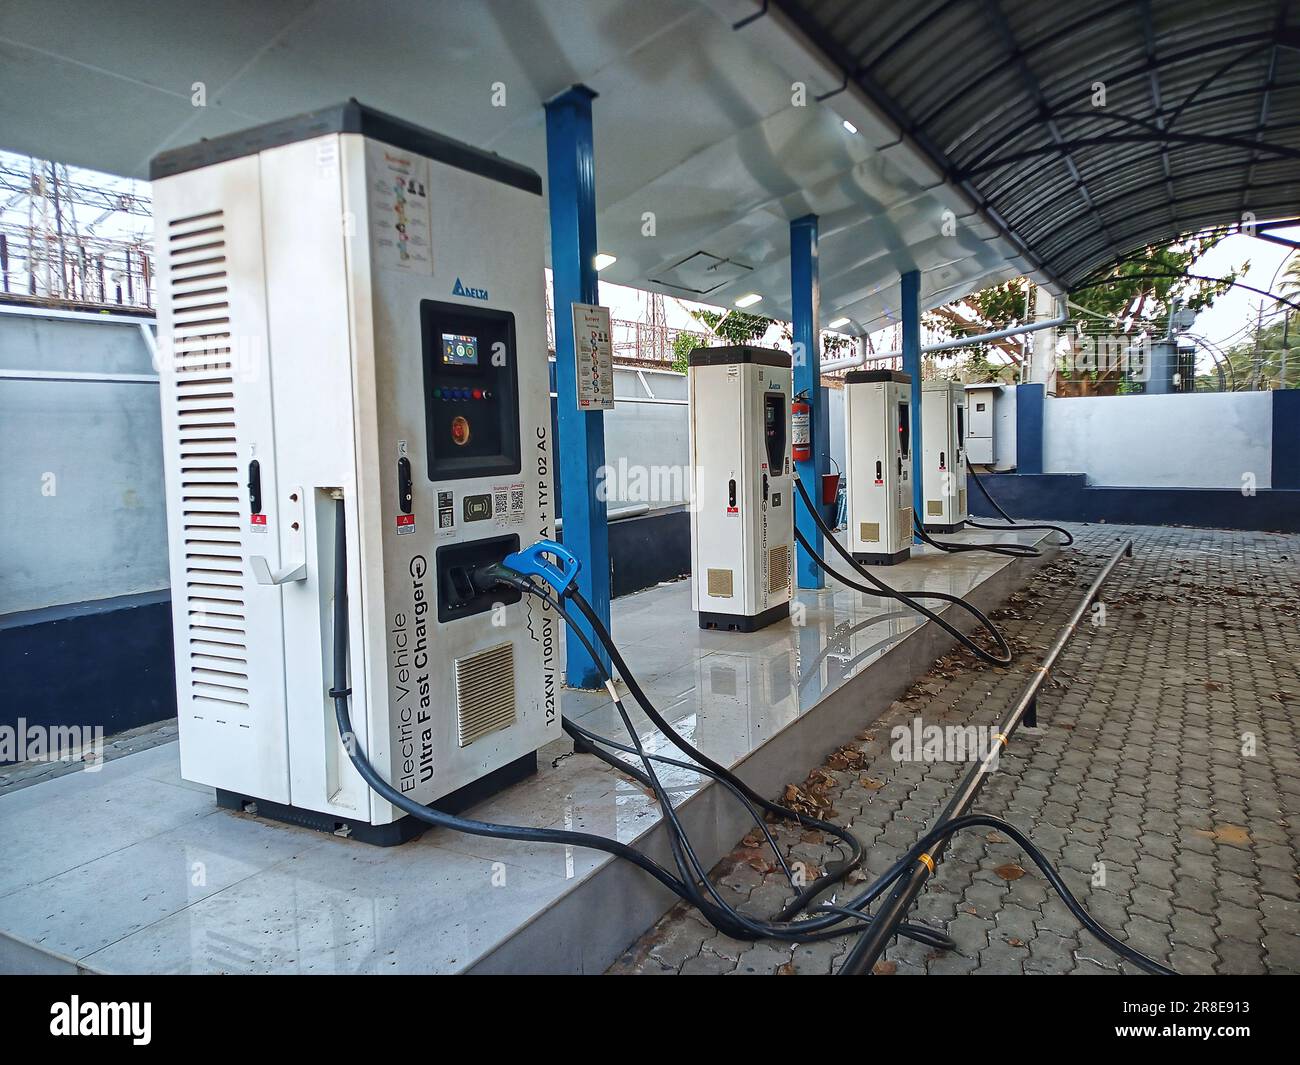 Electric vehicle charging in india,ev charging station india,india ev cars,ev charger in india,electric car charging station,ev station,citrroen e c3 Stock Photo